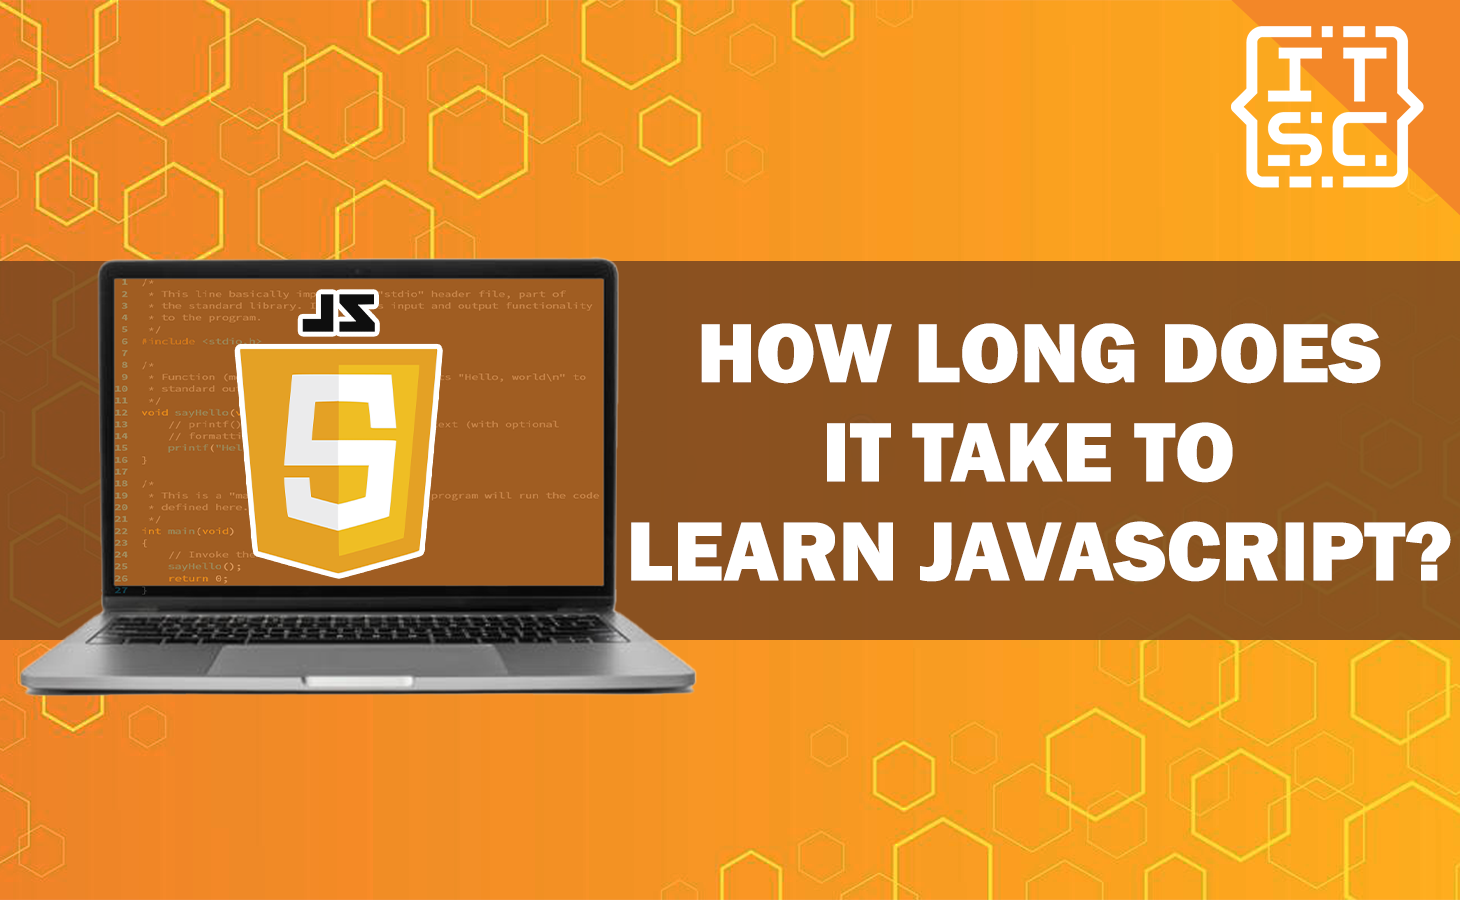 How long does it take to learn Javascript